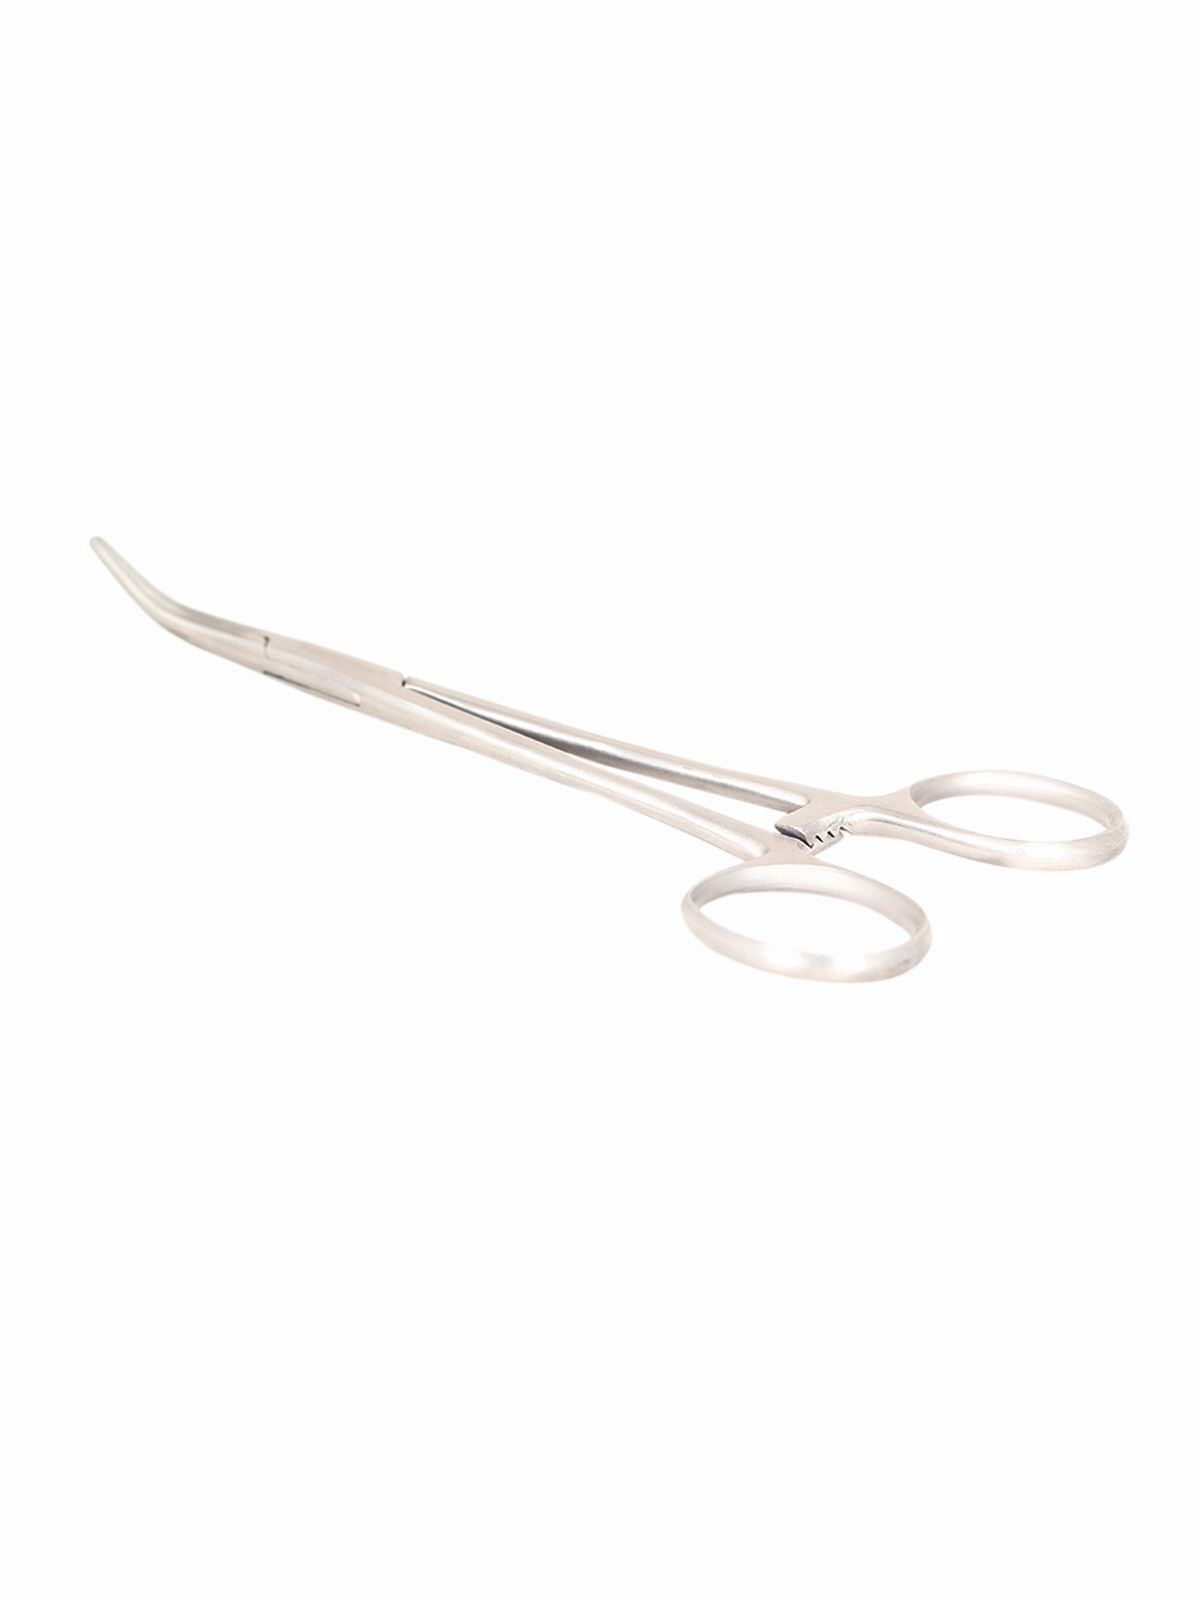 Artery Forcep 6 Inch curved economic